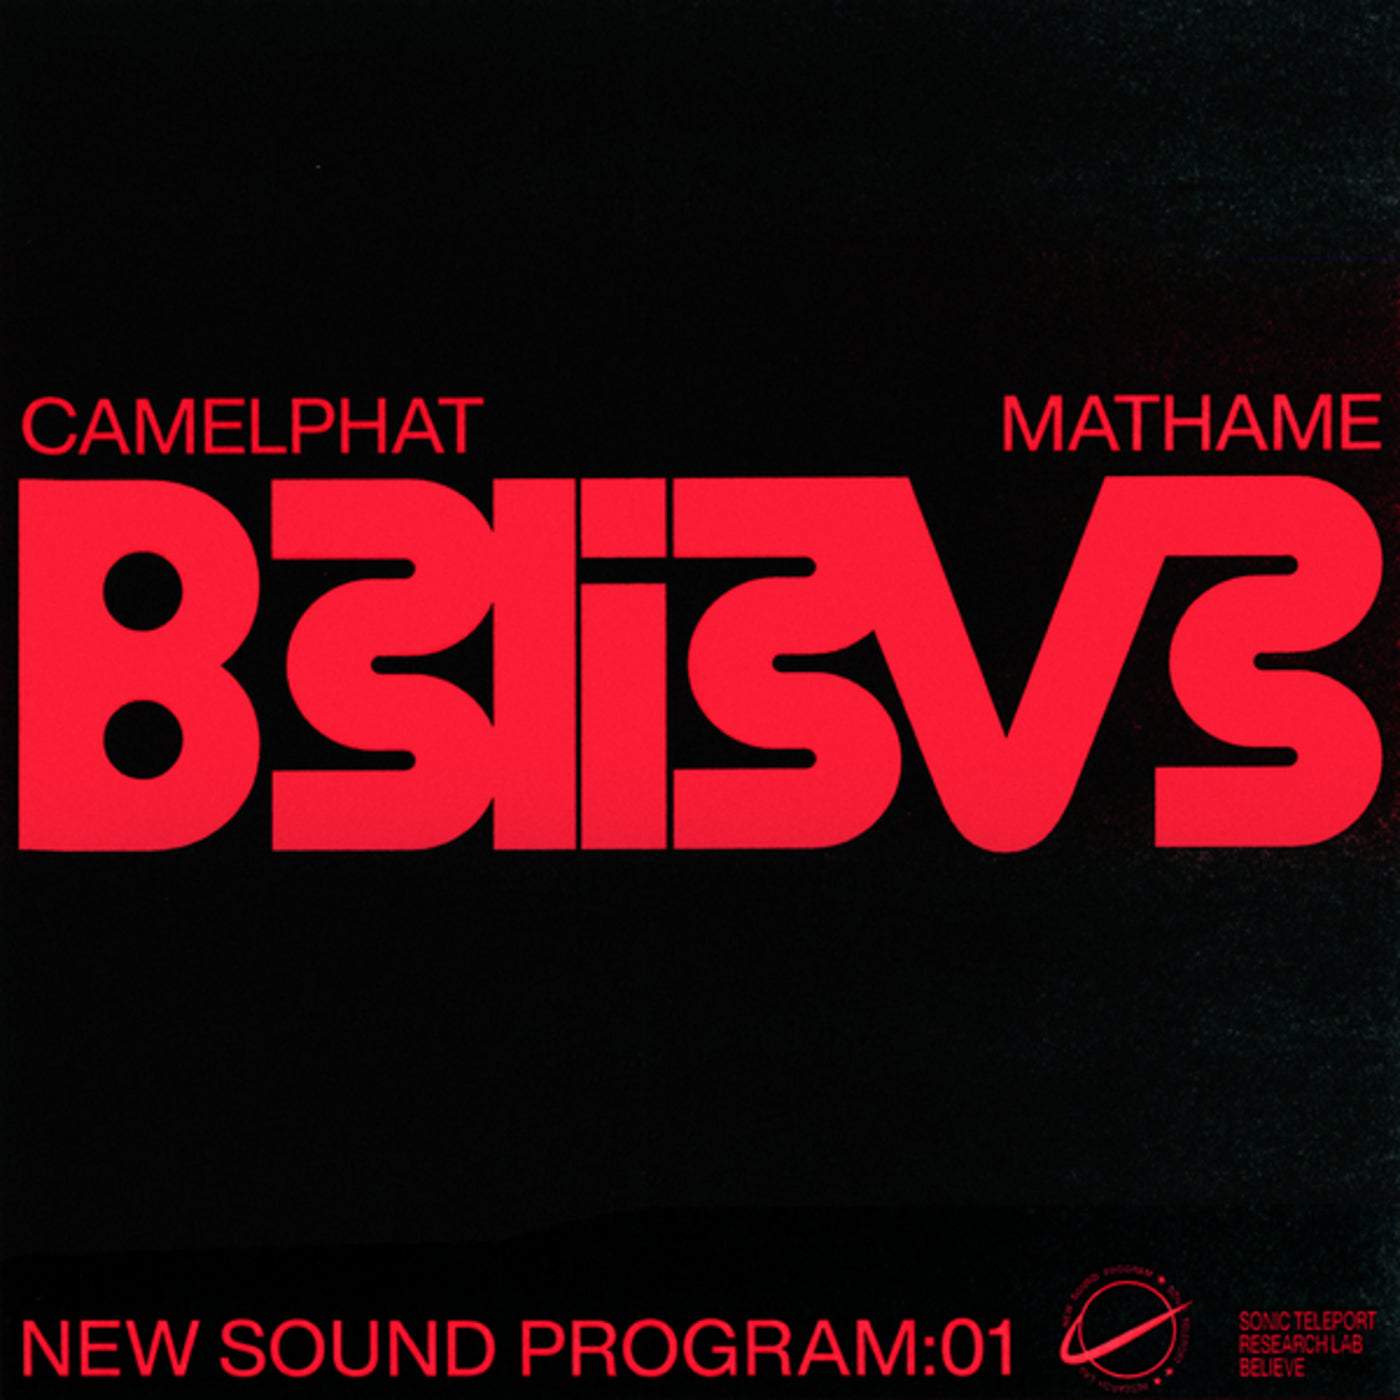 Download CamelPhat, Mathame - Believe on Electrobuzz